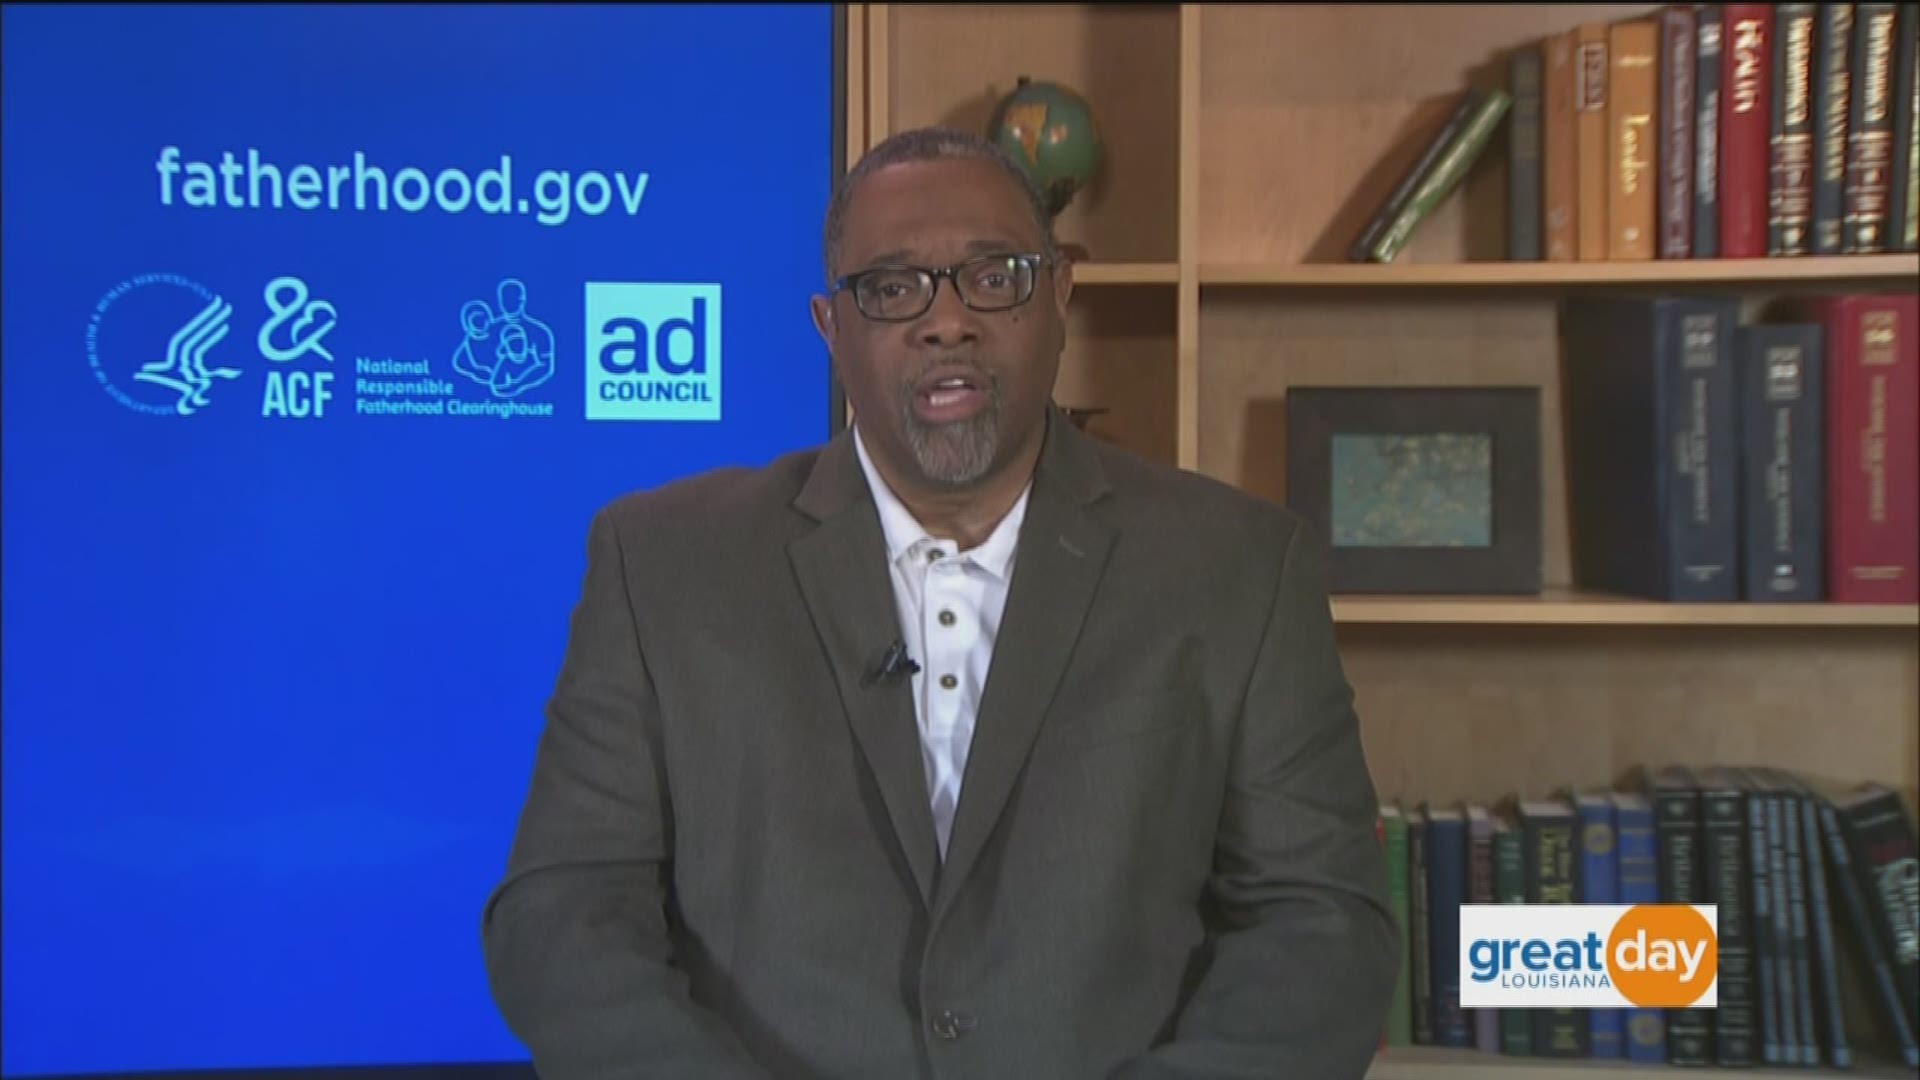 48% of dads say they do not spend as much time with their kids as they would like. Joining us with tips on how to be more present and engaged with your kids is Kenneth Braswell, CEO of Fathers Incorporated. Follow the #DanceLikeADad campaign on social media and go to fatherhood.gov for more information.